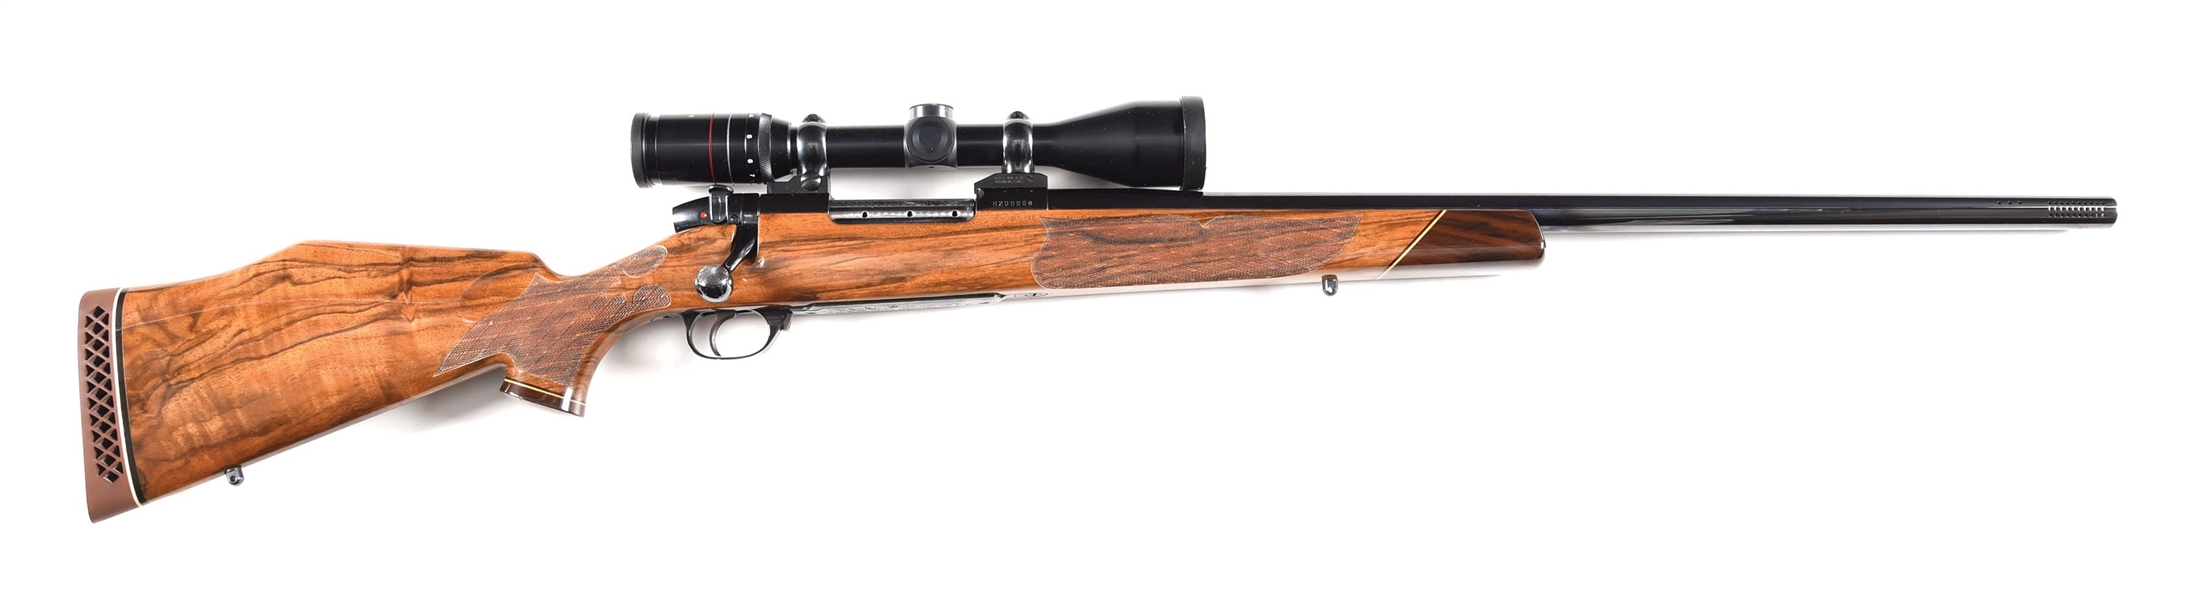 (M) WEATHERBY MARK V BOLT ACTION RIFLE IN .460 WEATHERBY MAGNUM.